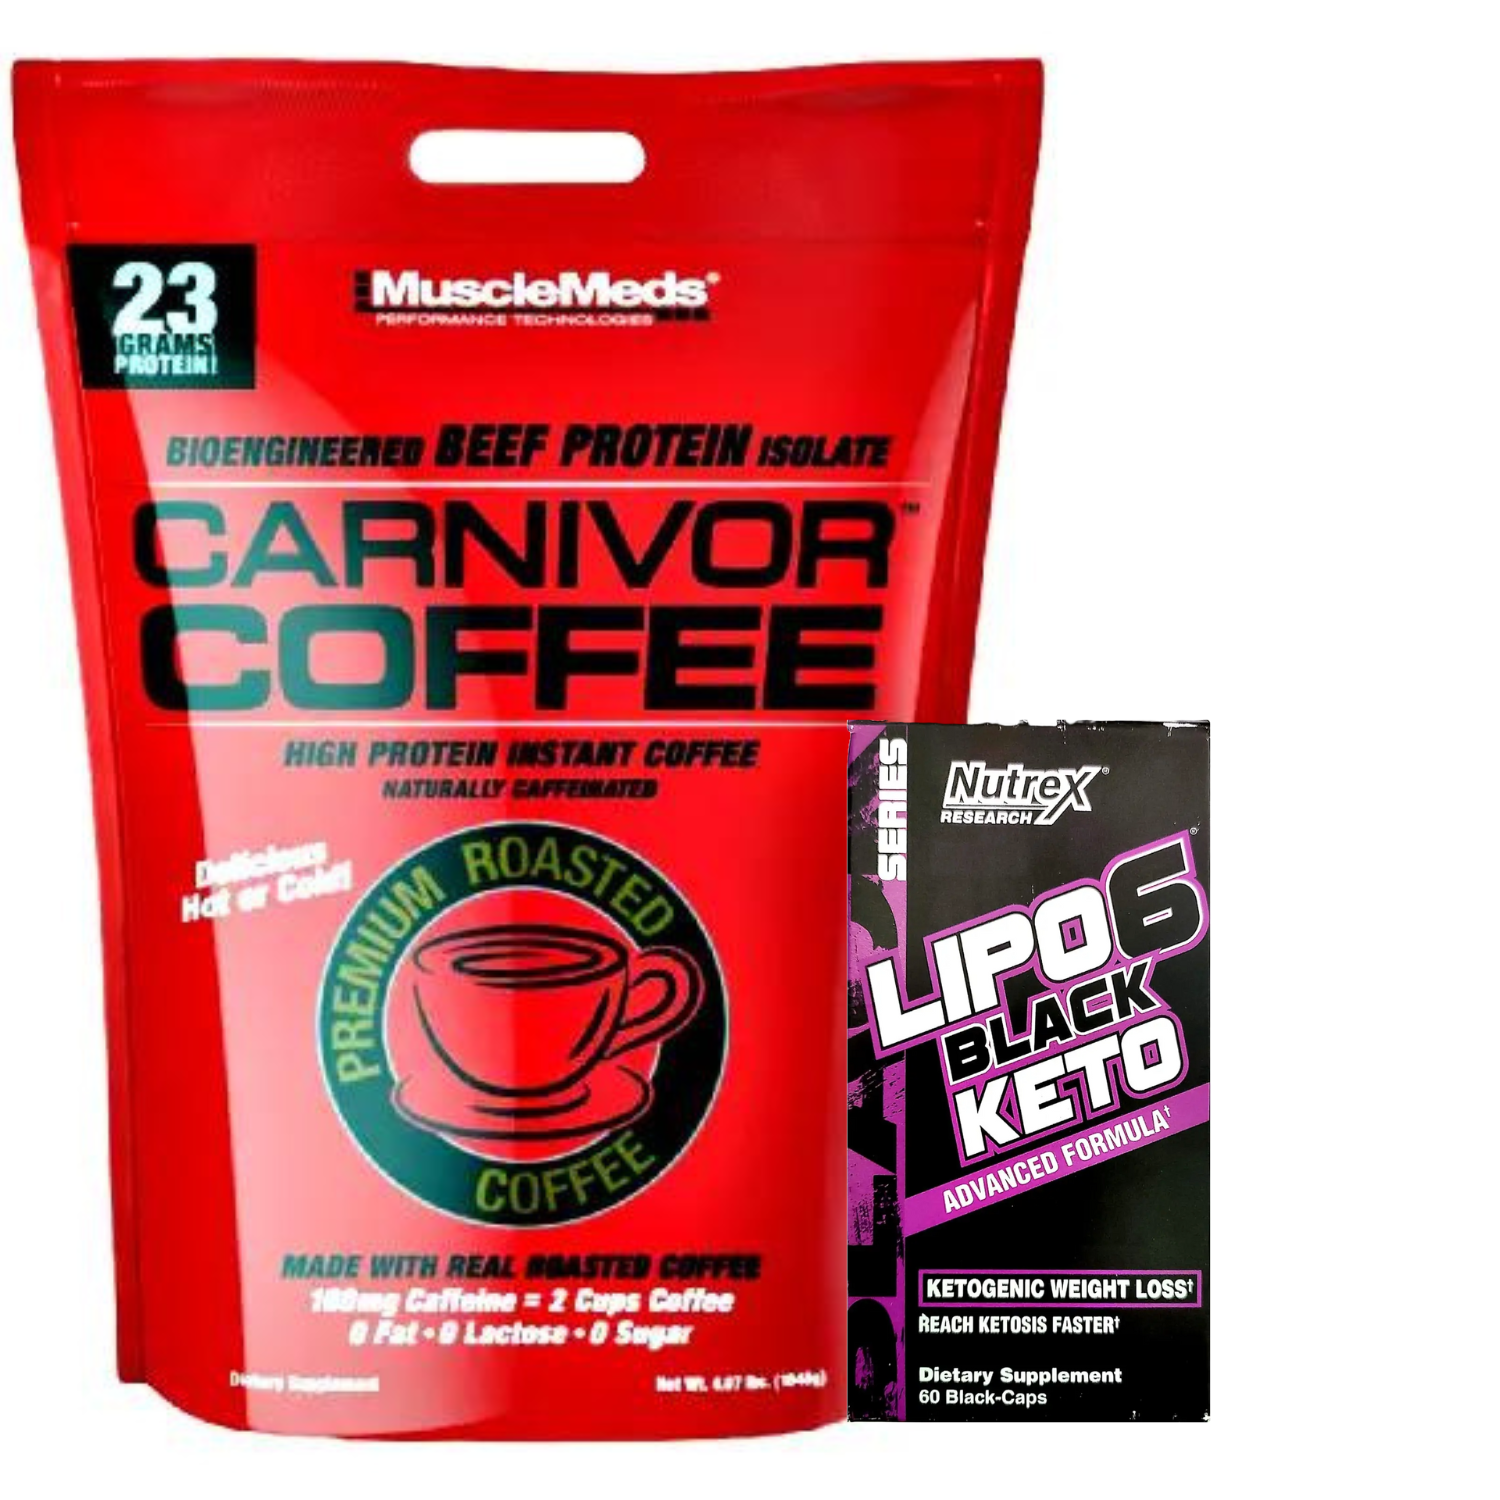 MuscleMeds Carnivor Instant Coffee (4lbs) and Nutrex Research Lipo6 Black Keto Bundle